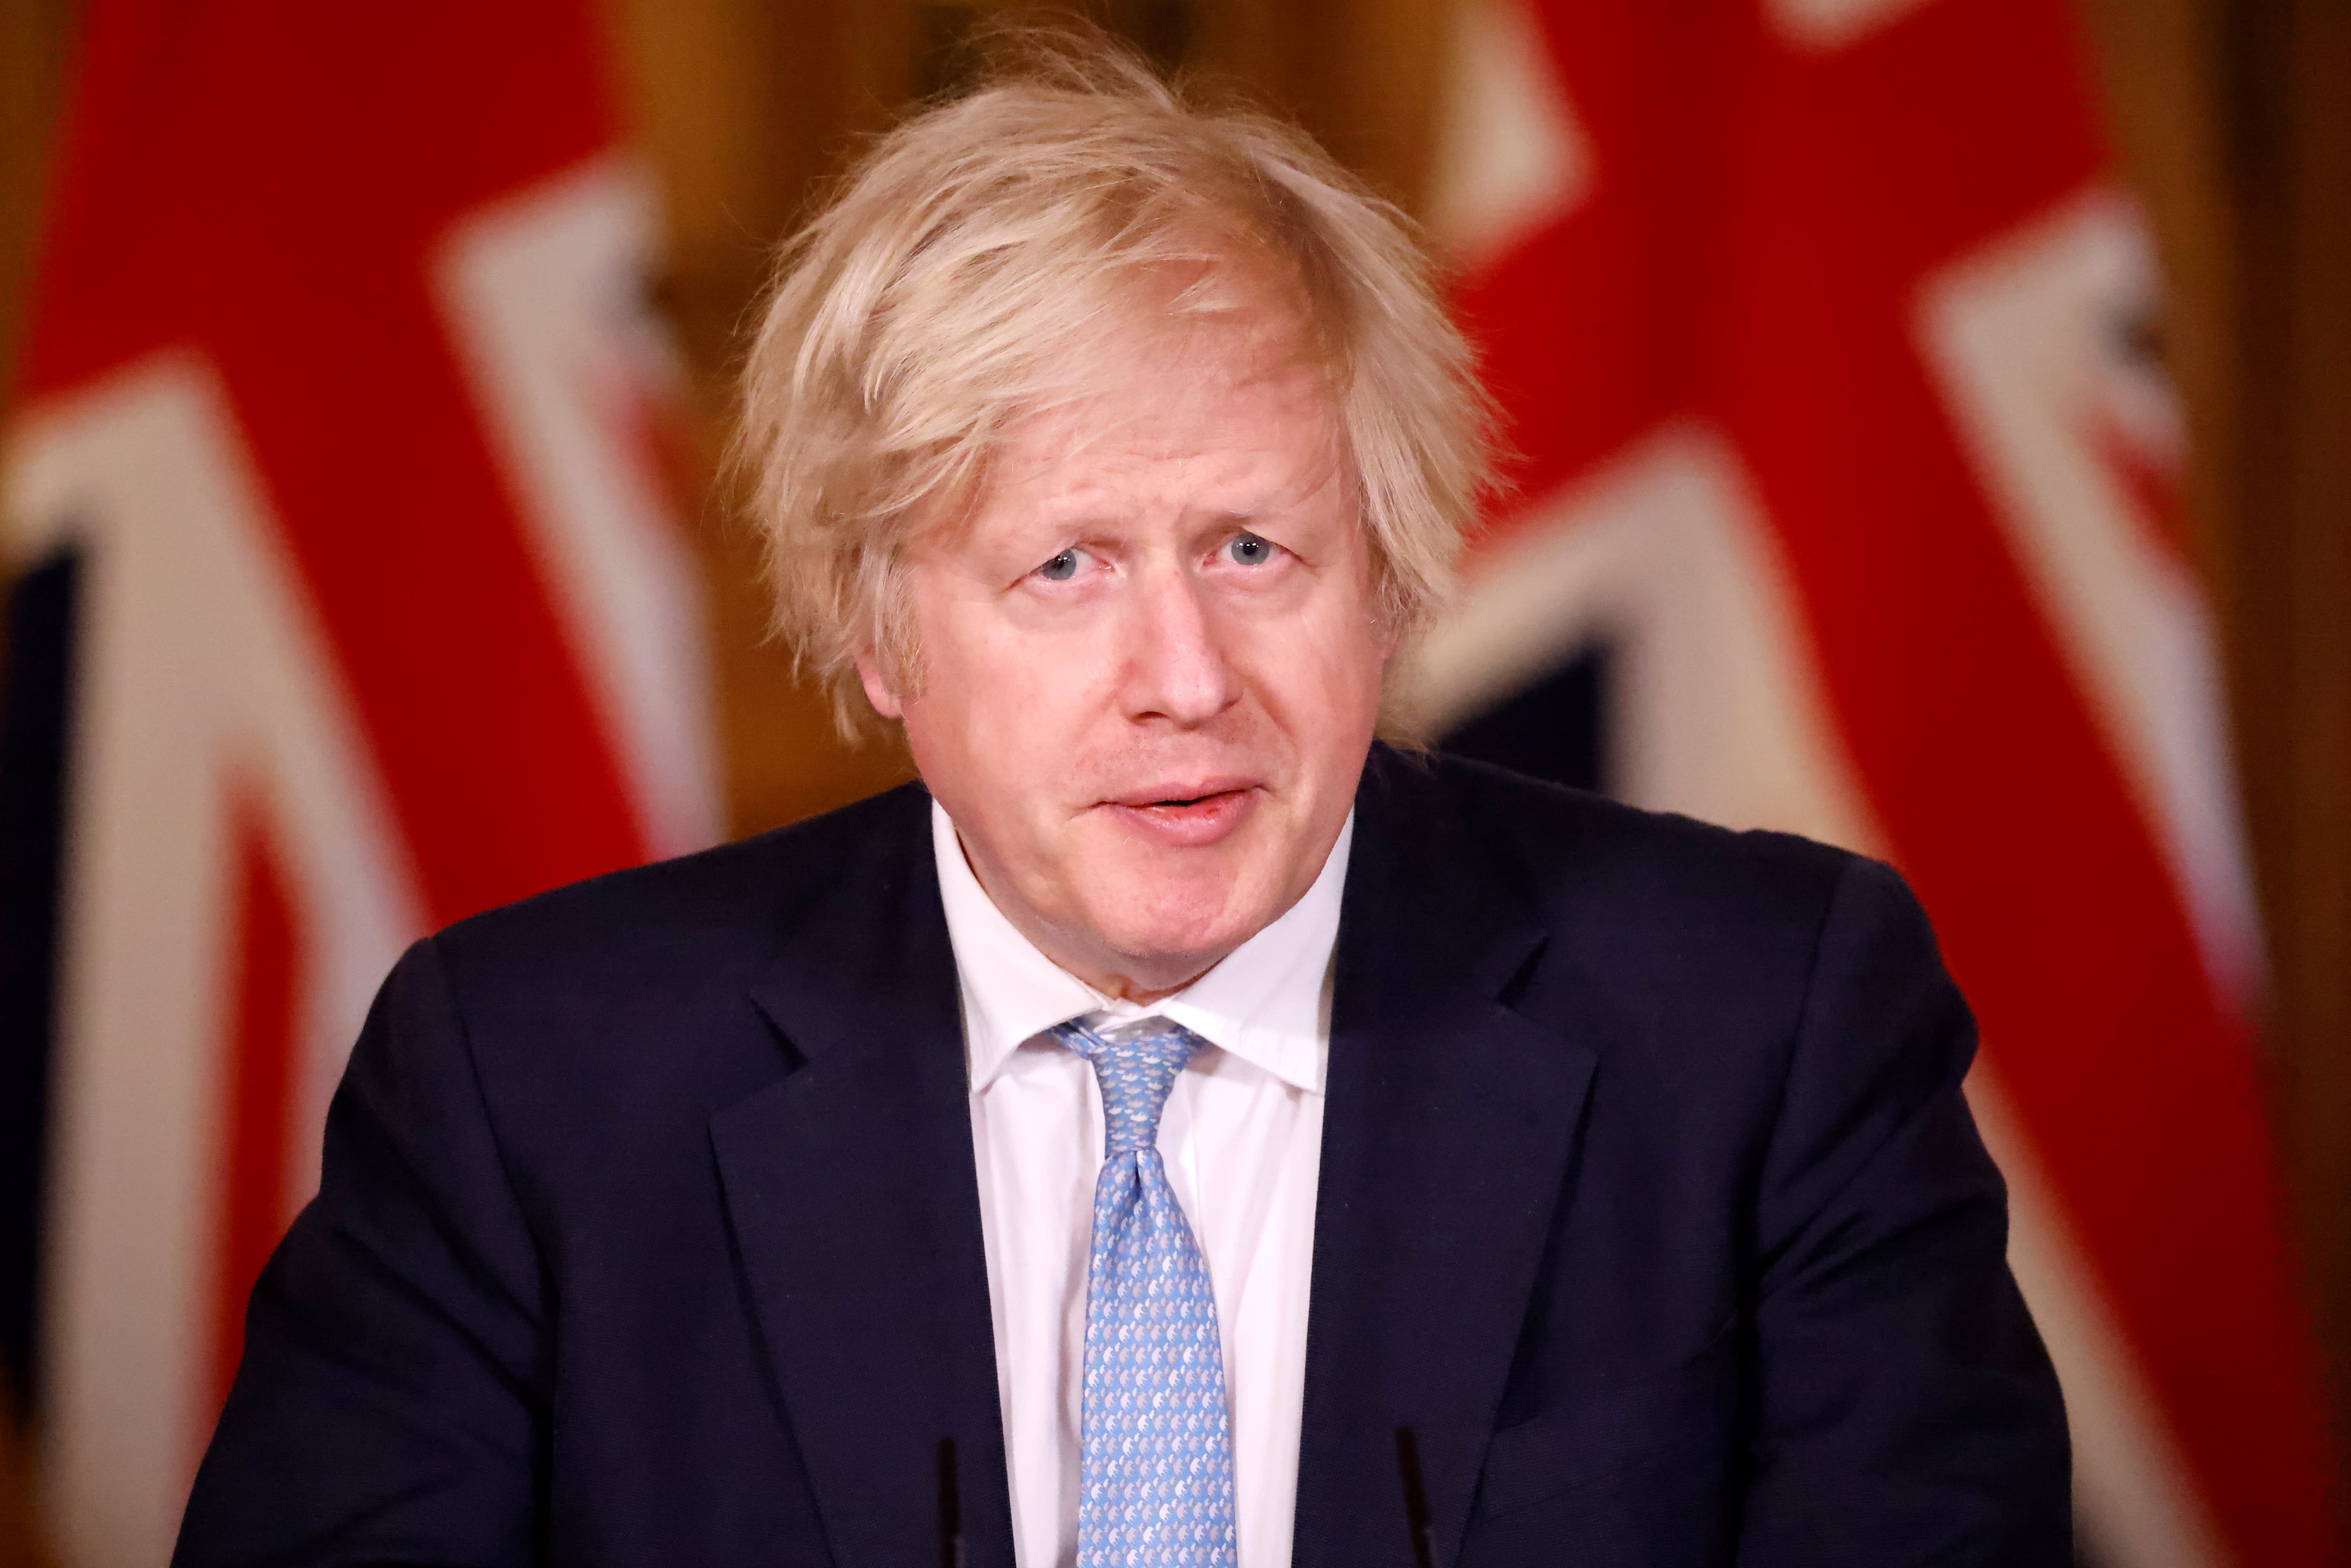 Britain’s Boris Johnson asks others to get Covid vaccine